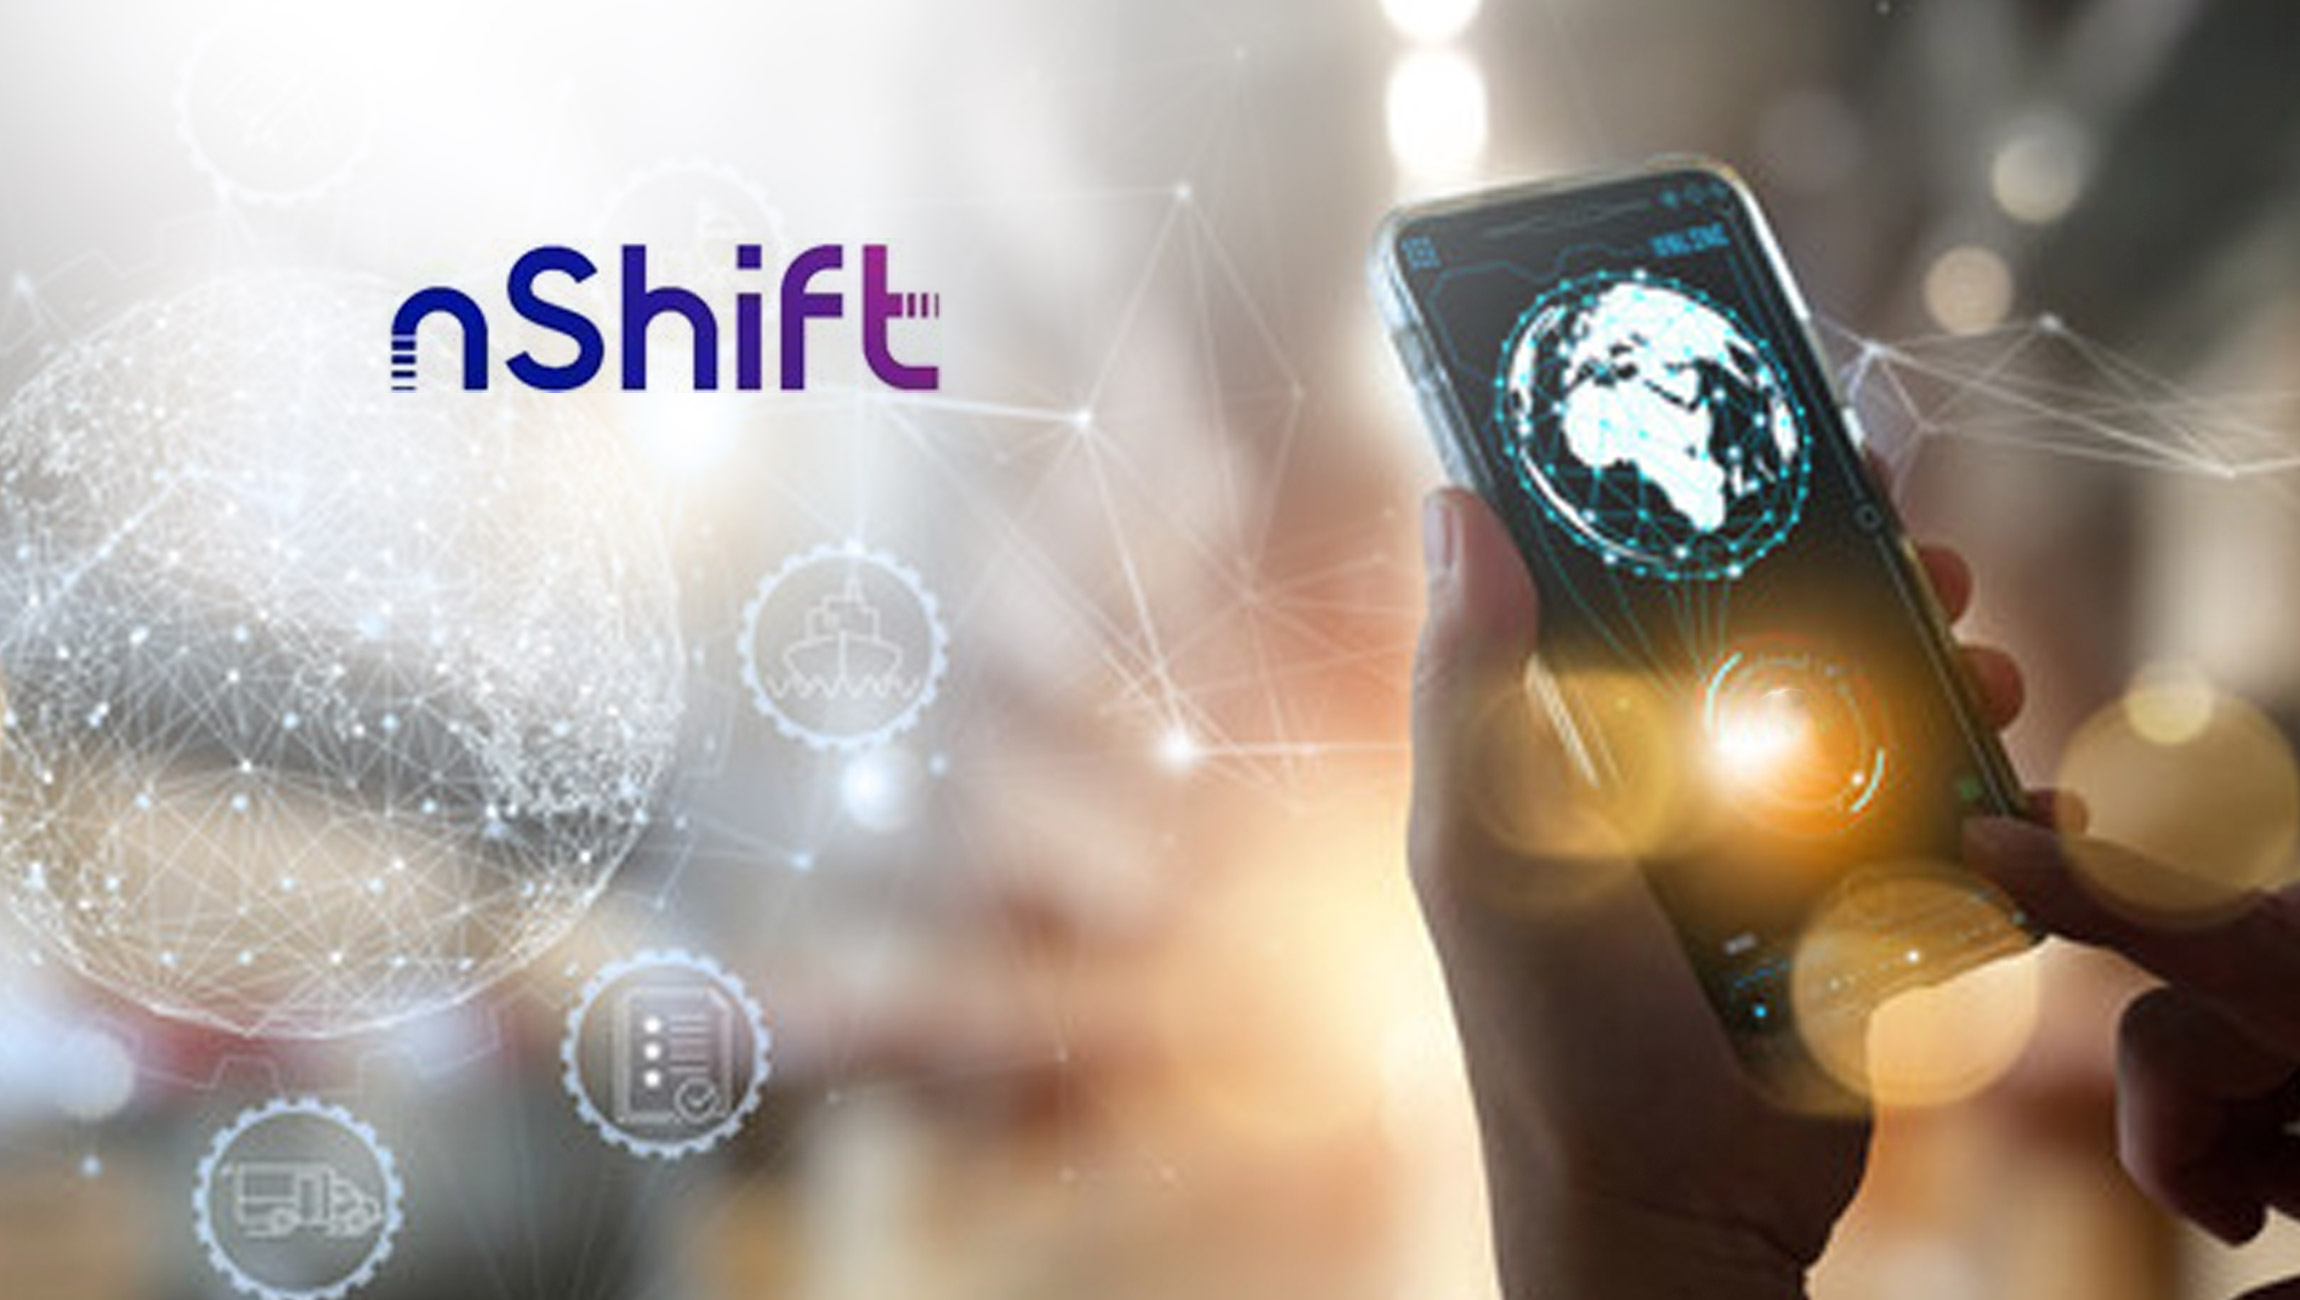 nShift To Roll Out Its Consumer Order Tracking App Across the Nordics